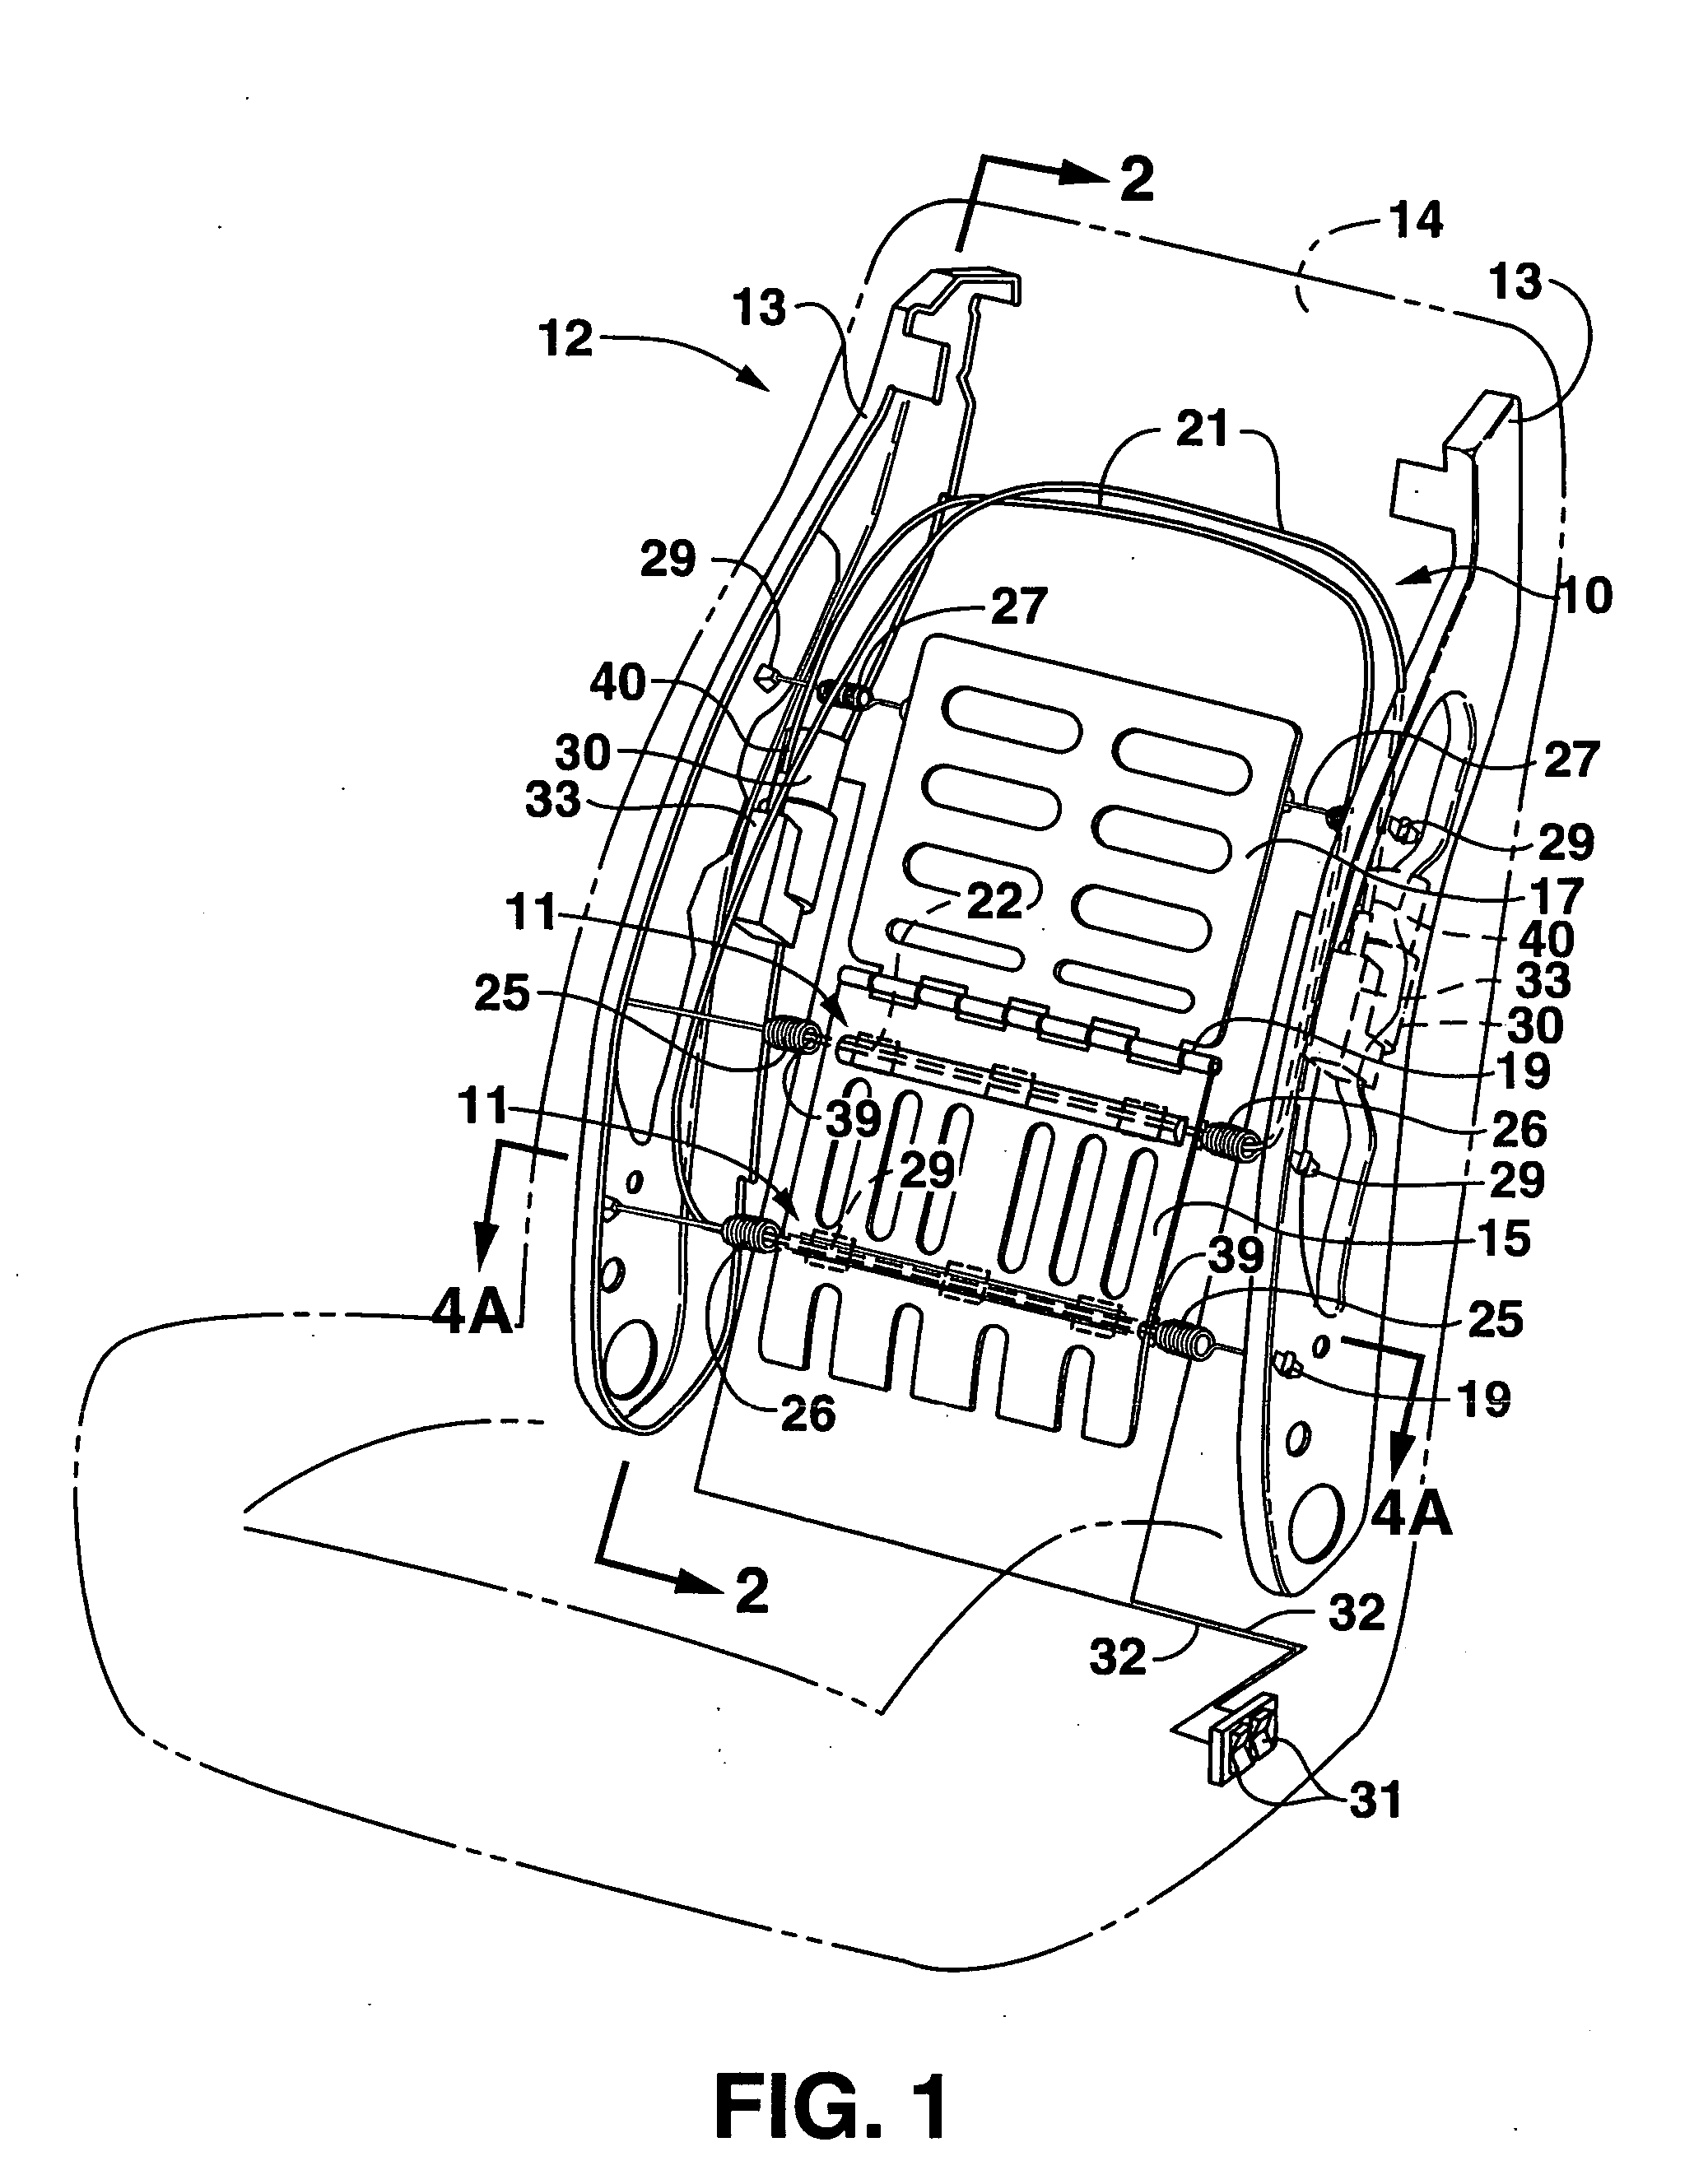 Adjustable lumbar support with extensive configurability